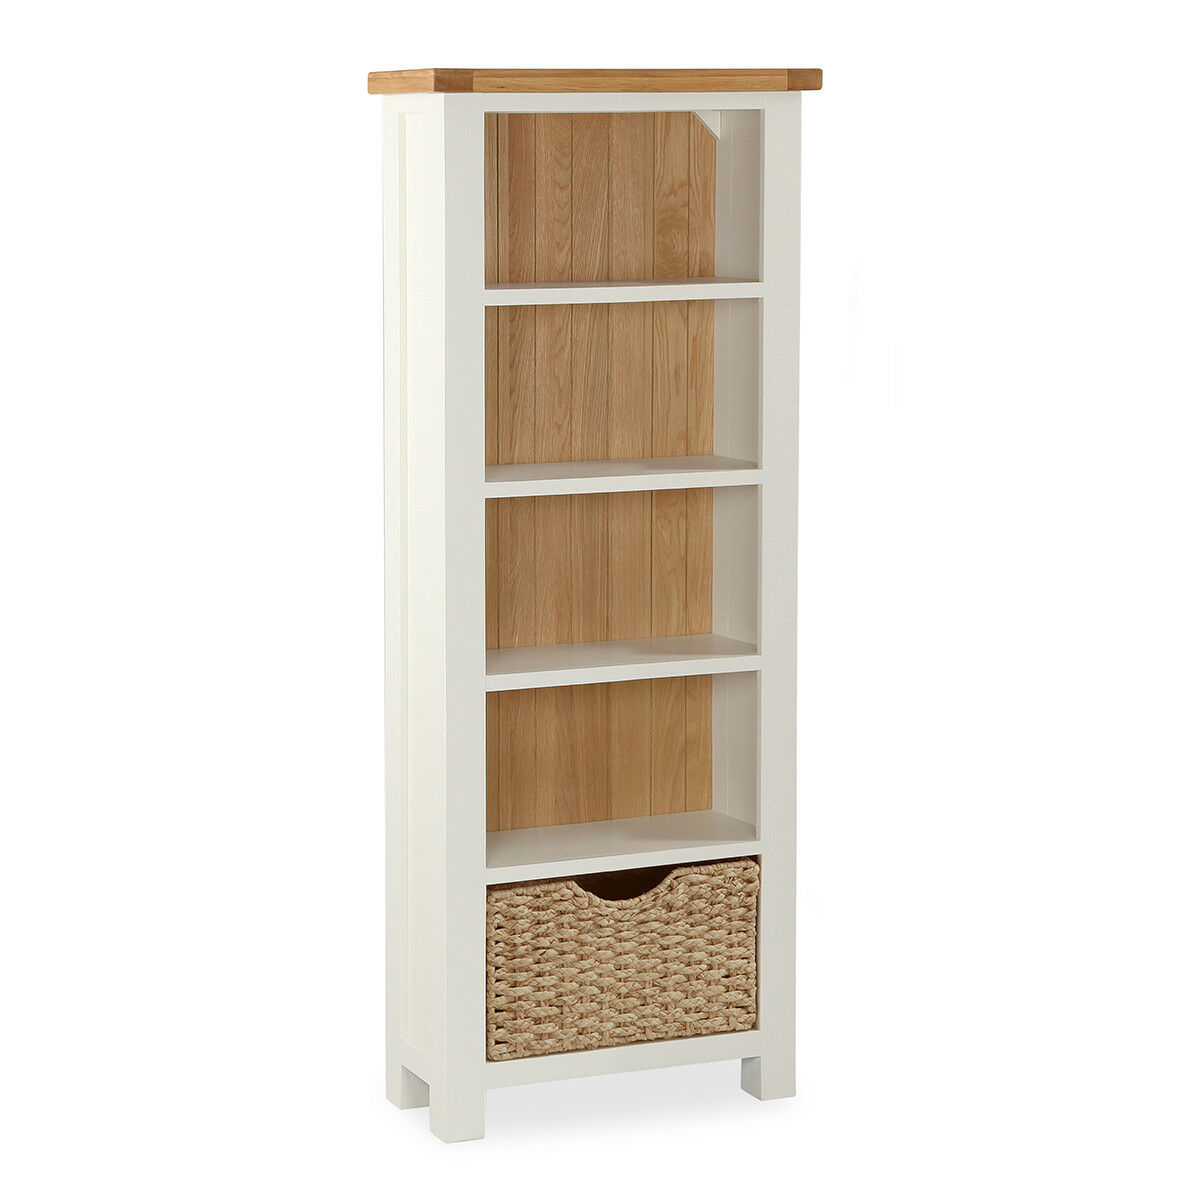 Details About Hampshire Cream Painted Oak Top Tall Slim Bookcase With Storage Basket inside measurements 1200 X 1200